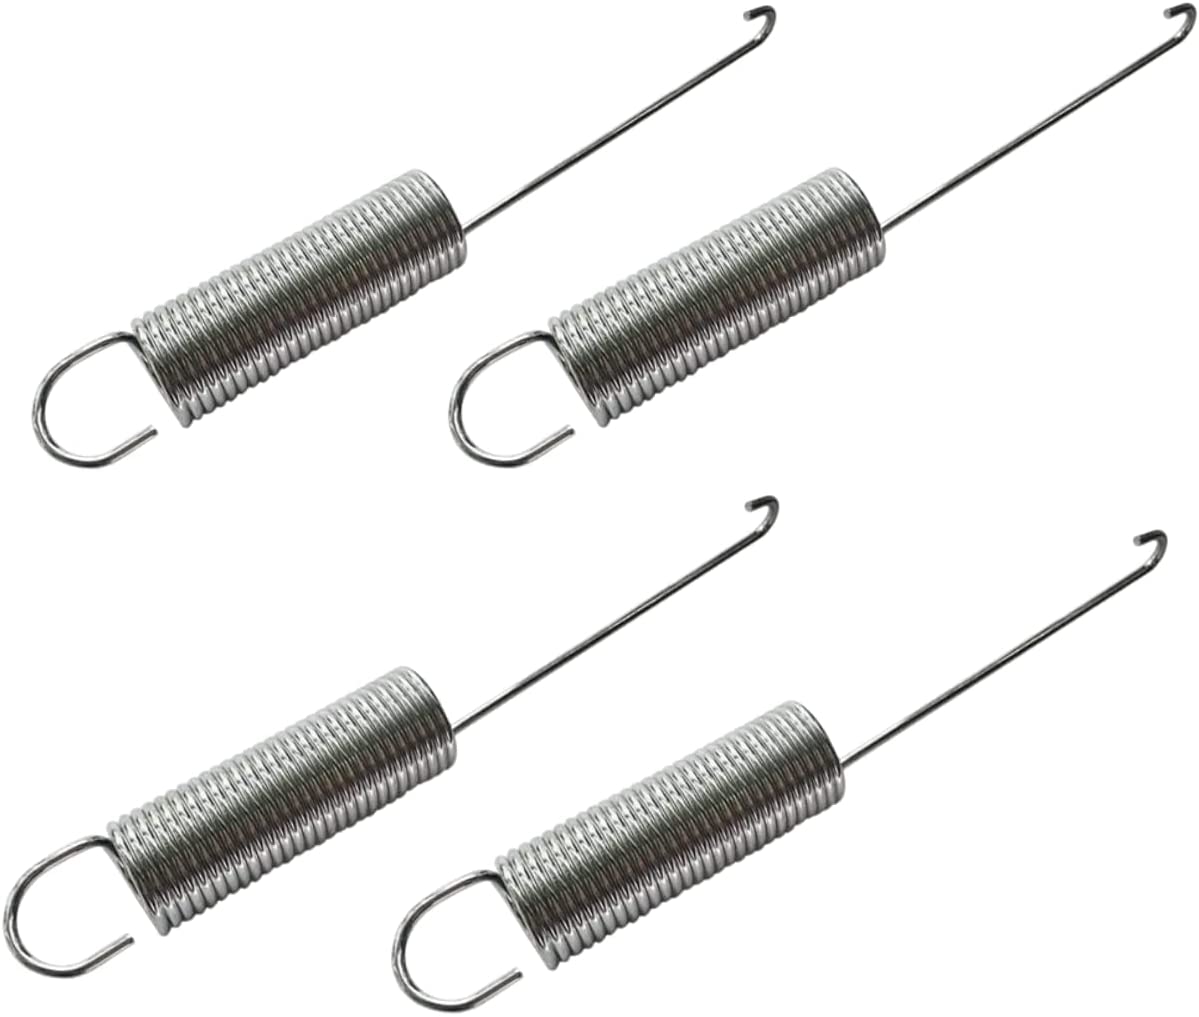 Scaroo W10250667 Counter Balance Spring Compatible Whirlpool 388492 4-Pack - image 1 of 5